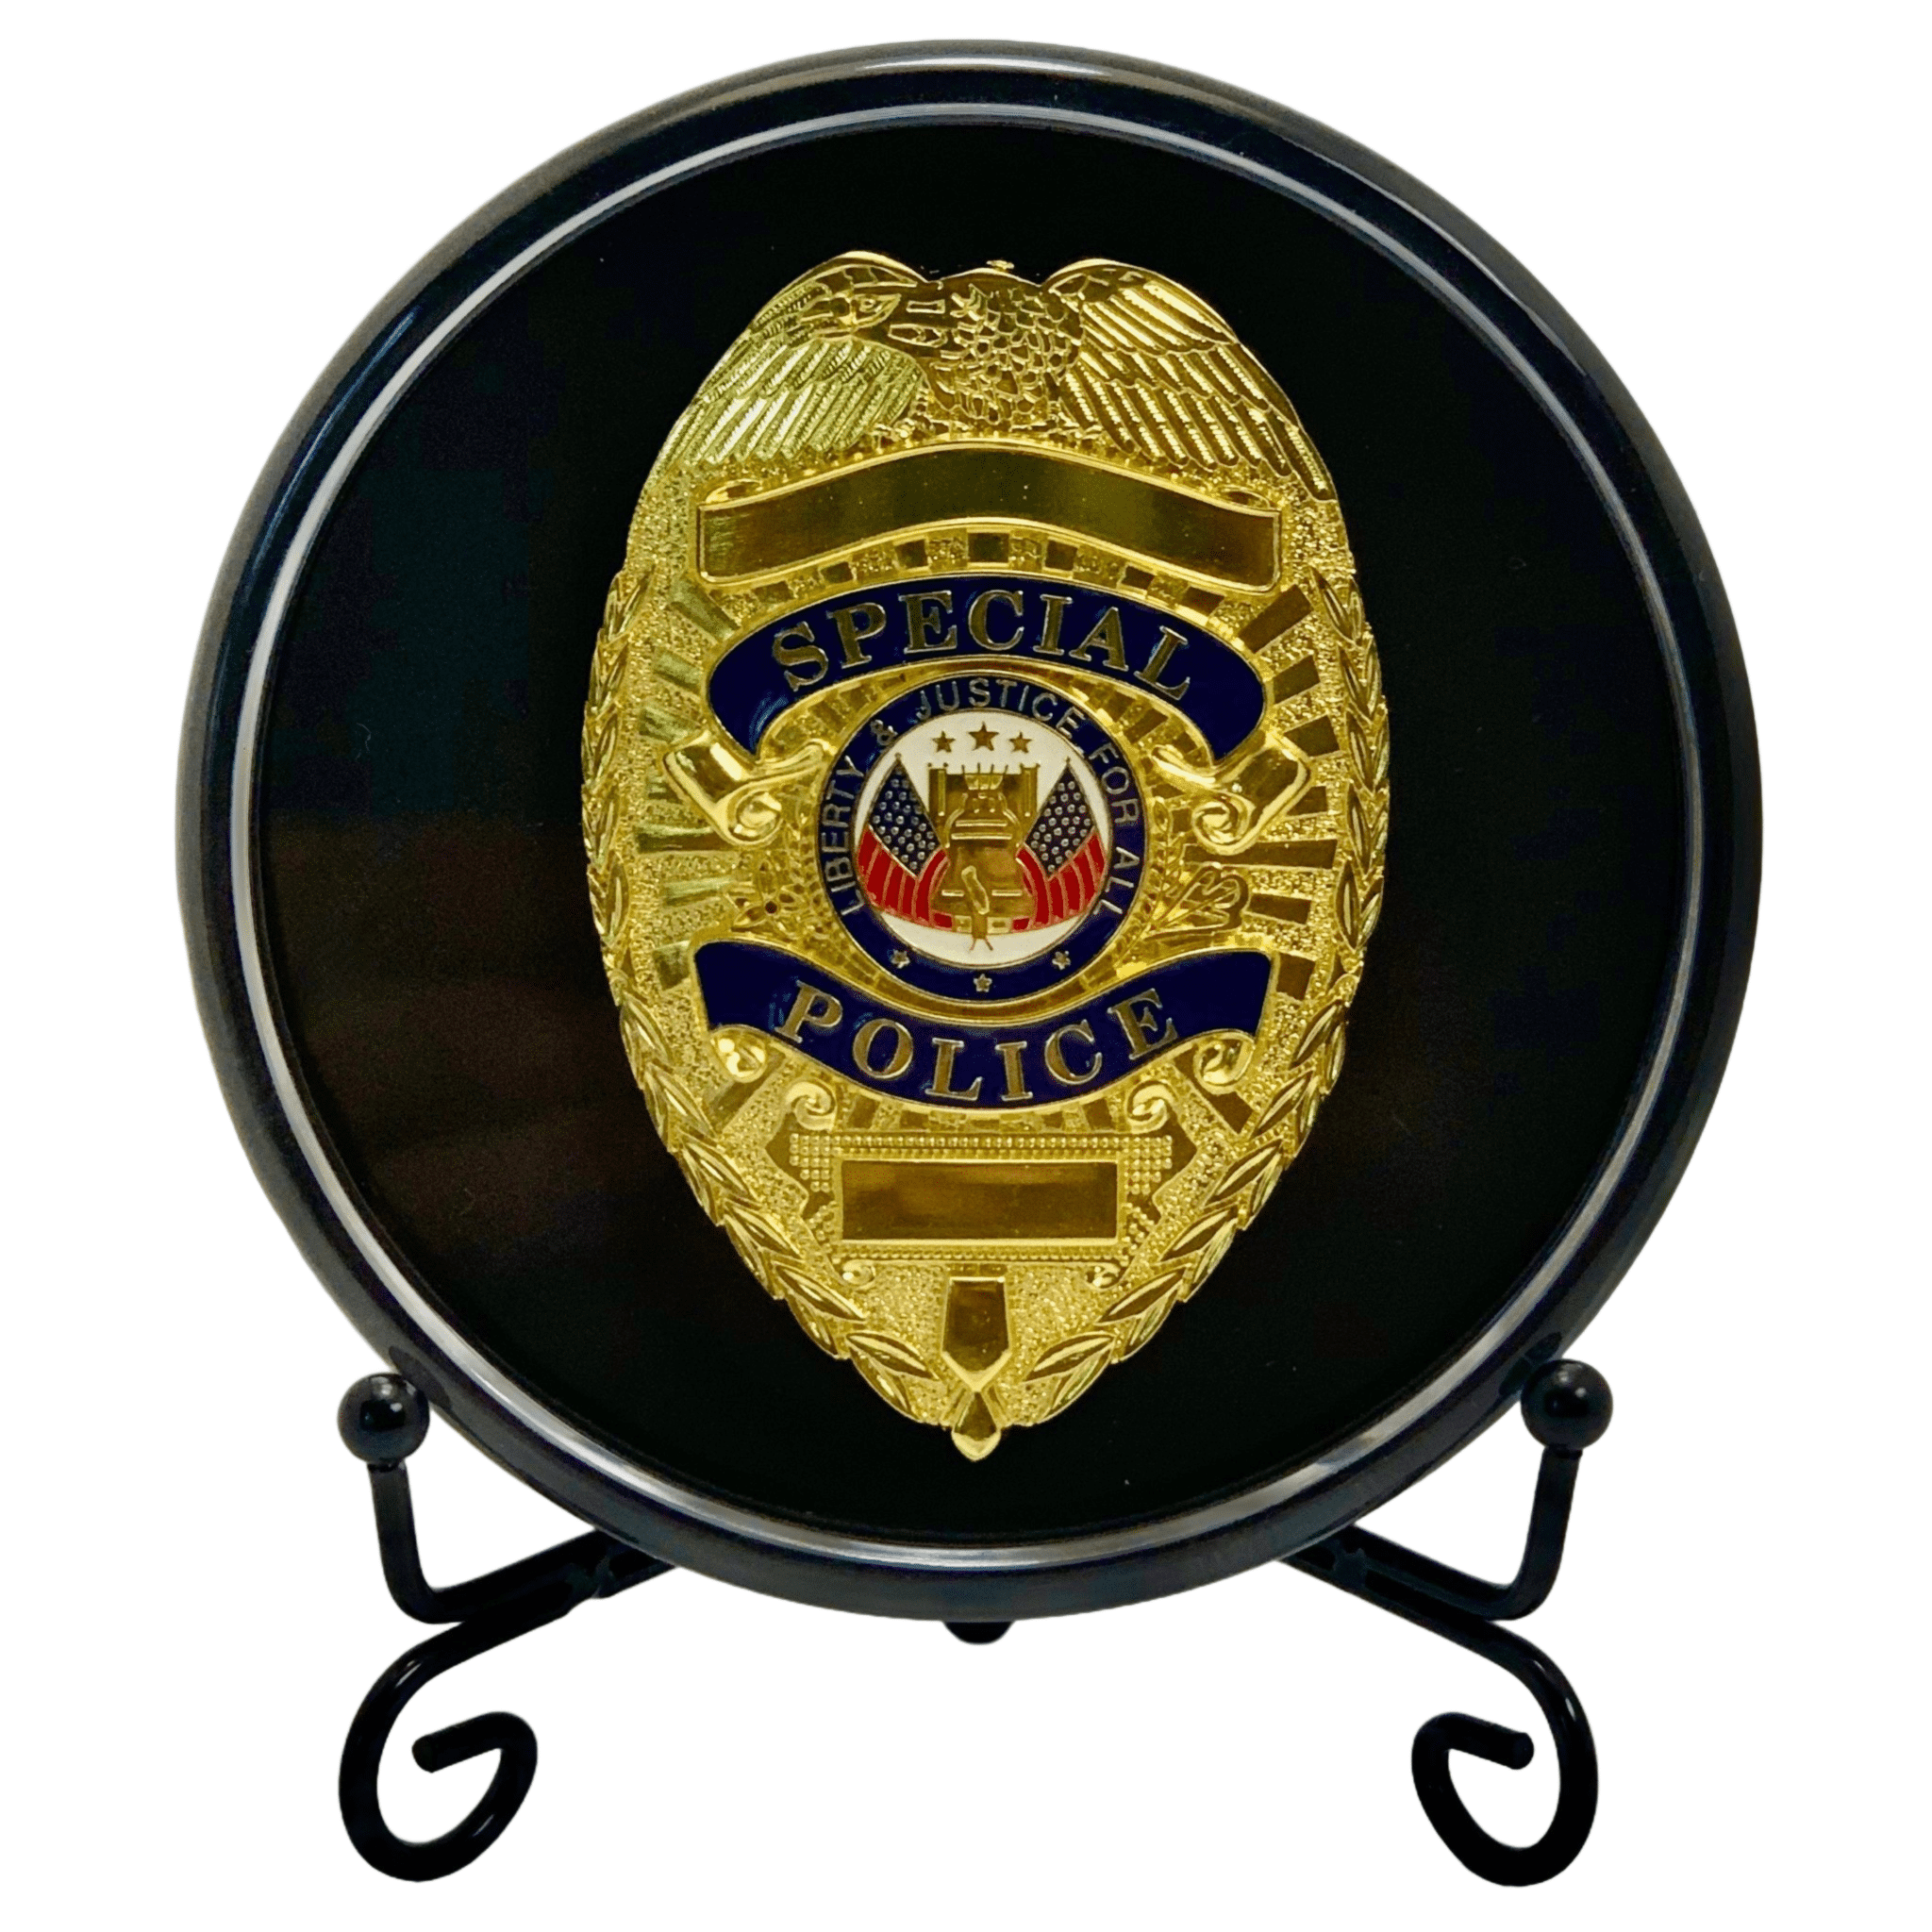 Kudos Badge Display Case with Stand - Shadow Box for Policeman, Fire Badge  - Badge Holder Gift for Cop, Security Officer or Firefighter 